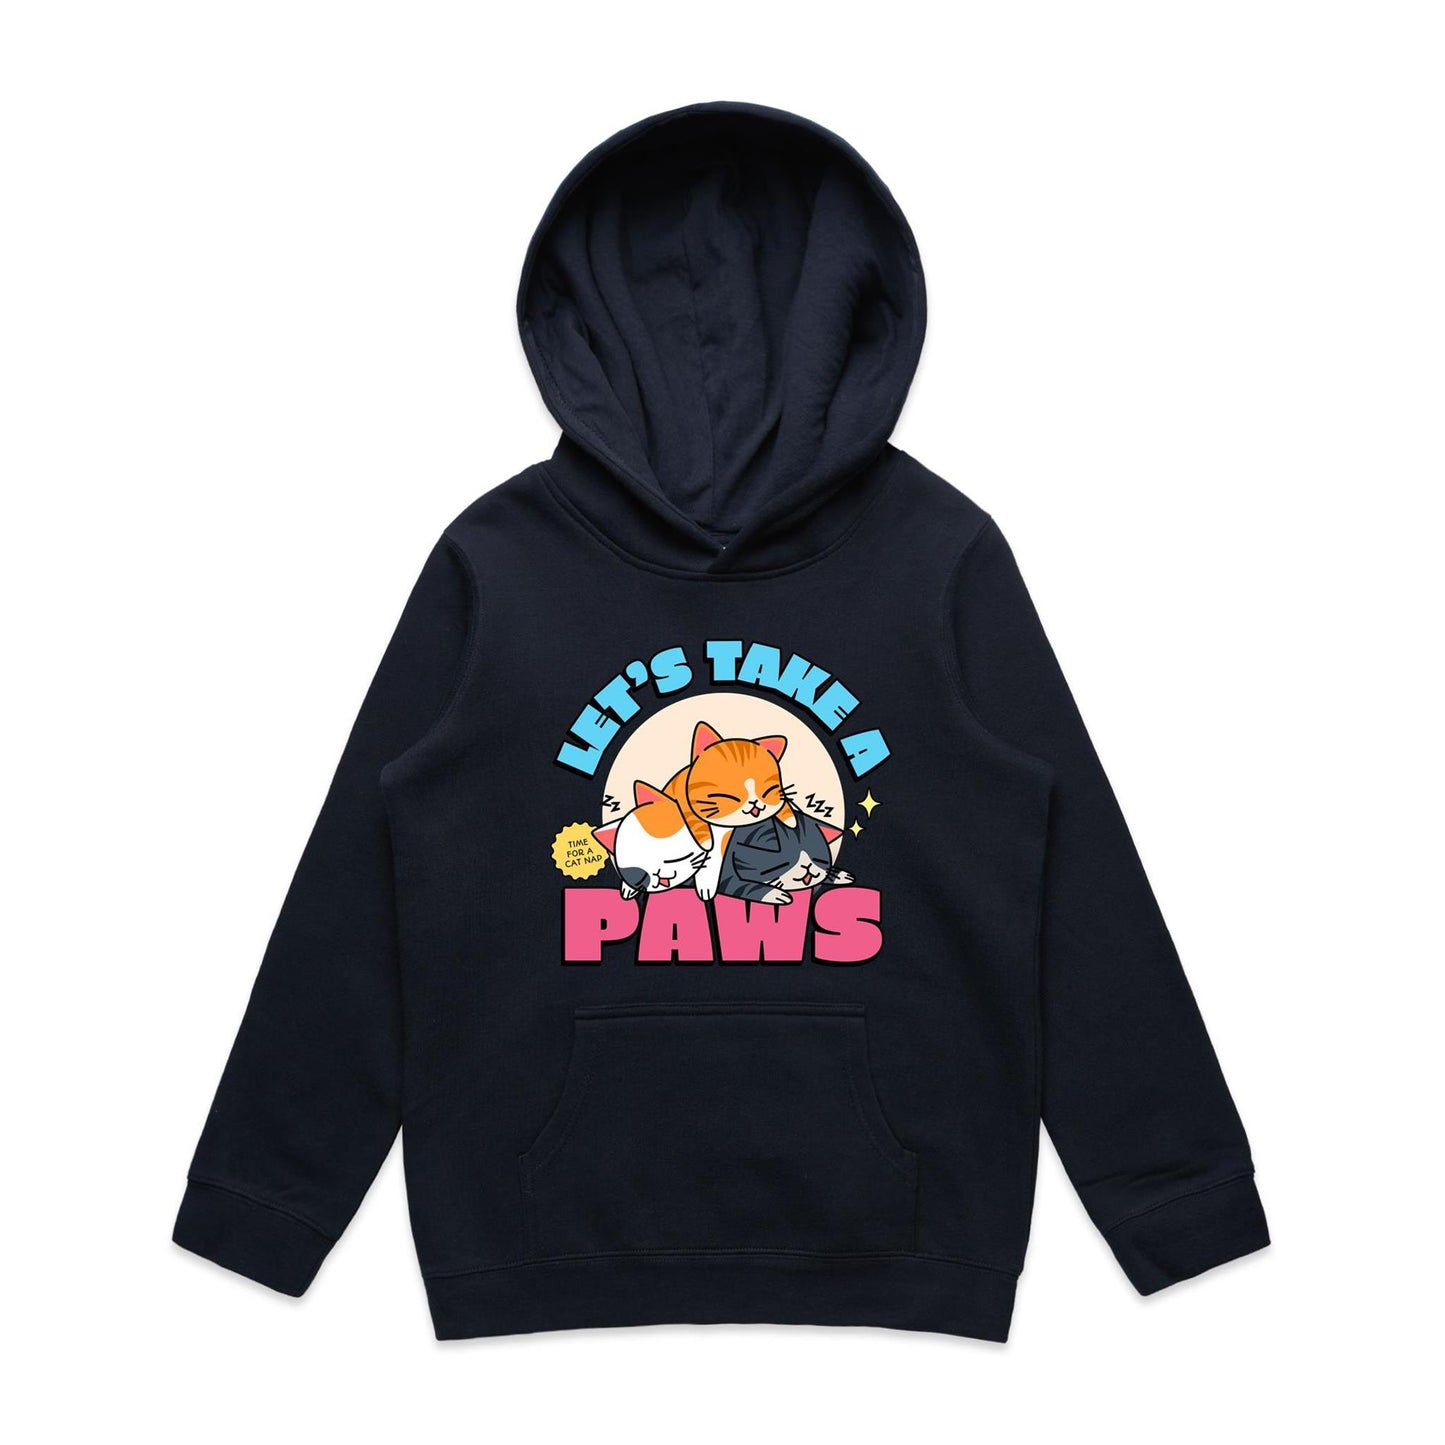 Let's Take A Paws, Time For A Cat Nap - Youth Supply Hood Navy Kids Hoodie animal